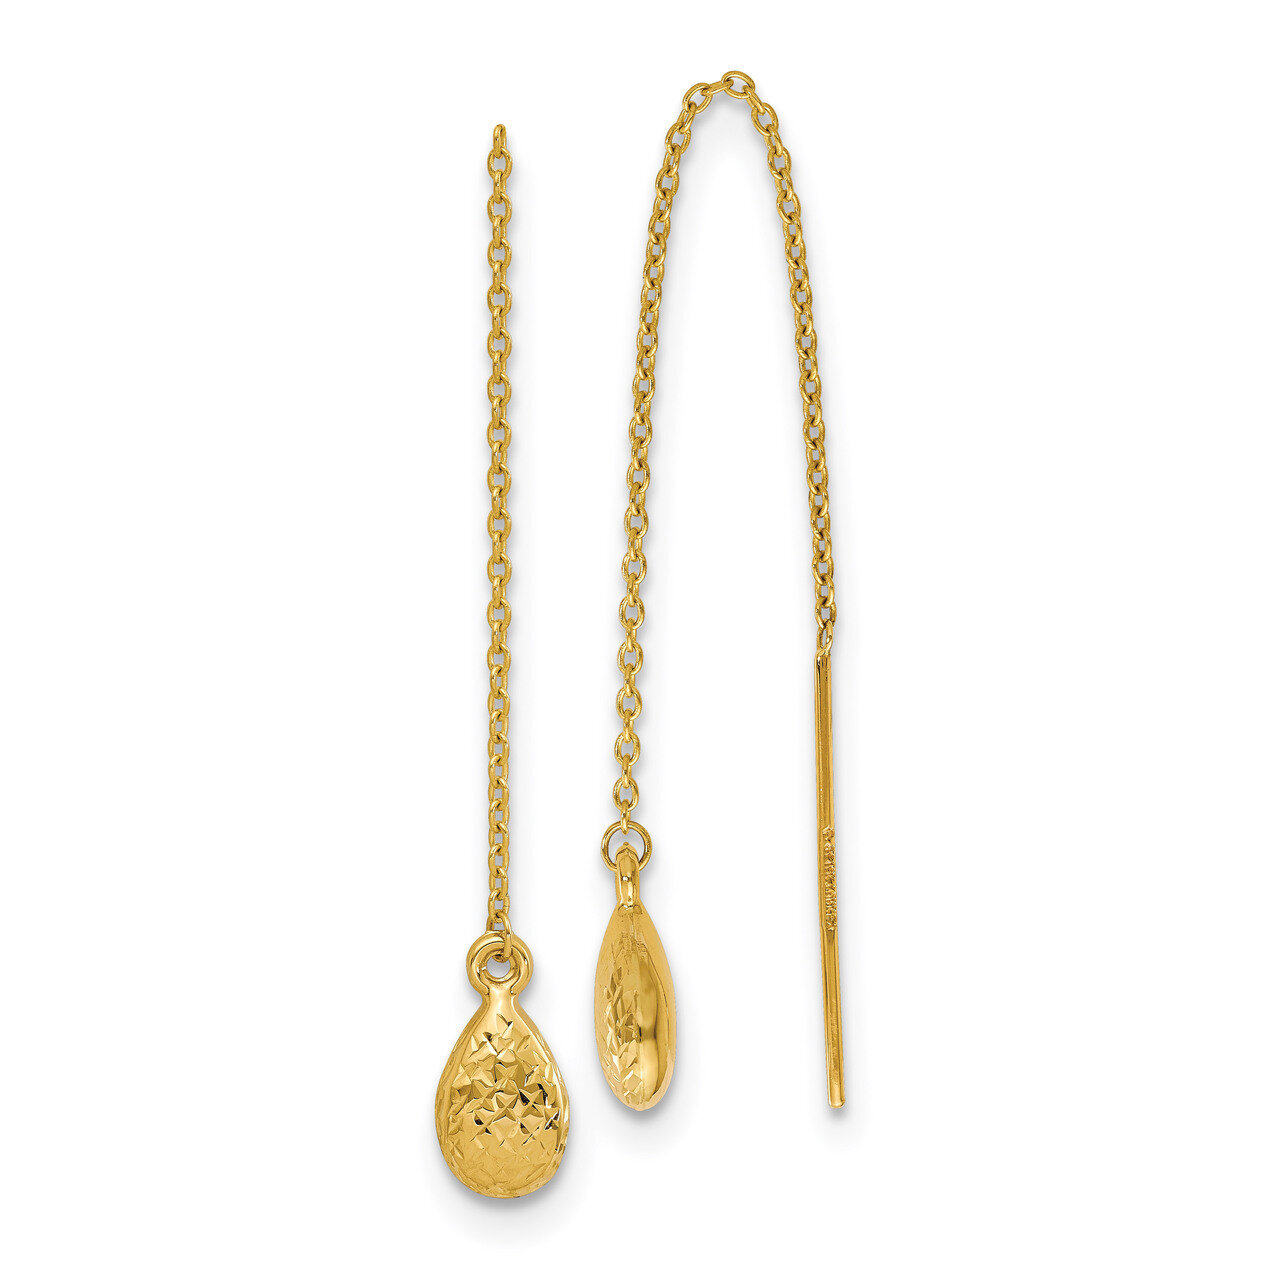 Tear Drop Threader Earrings 14k Gold Polished & Textured HB-LE1498